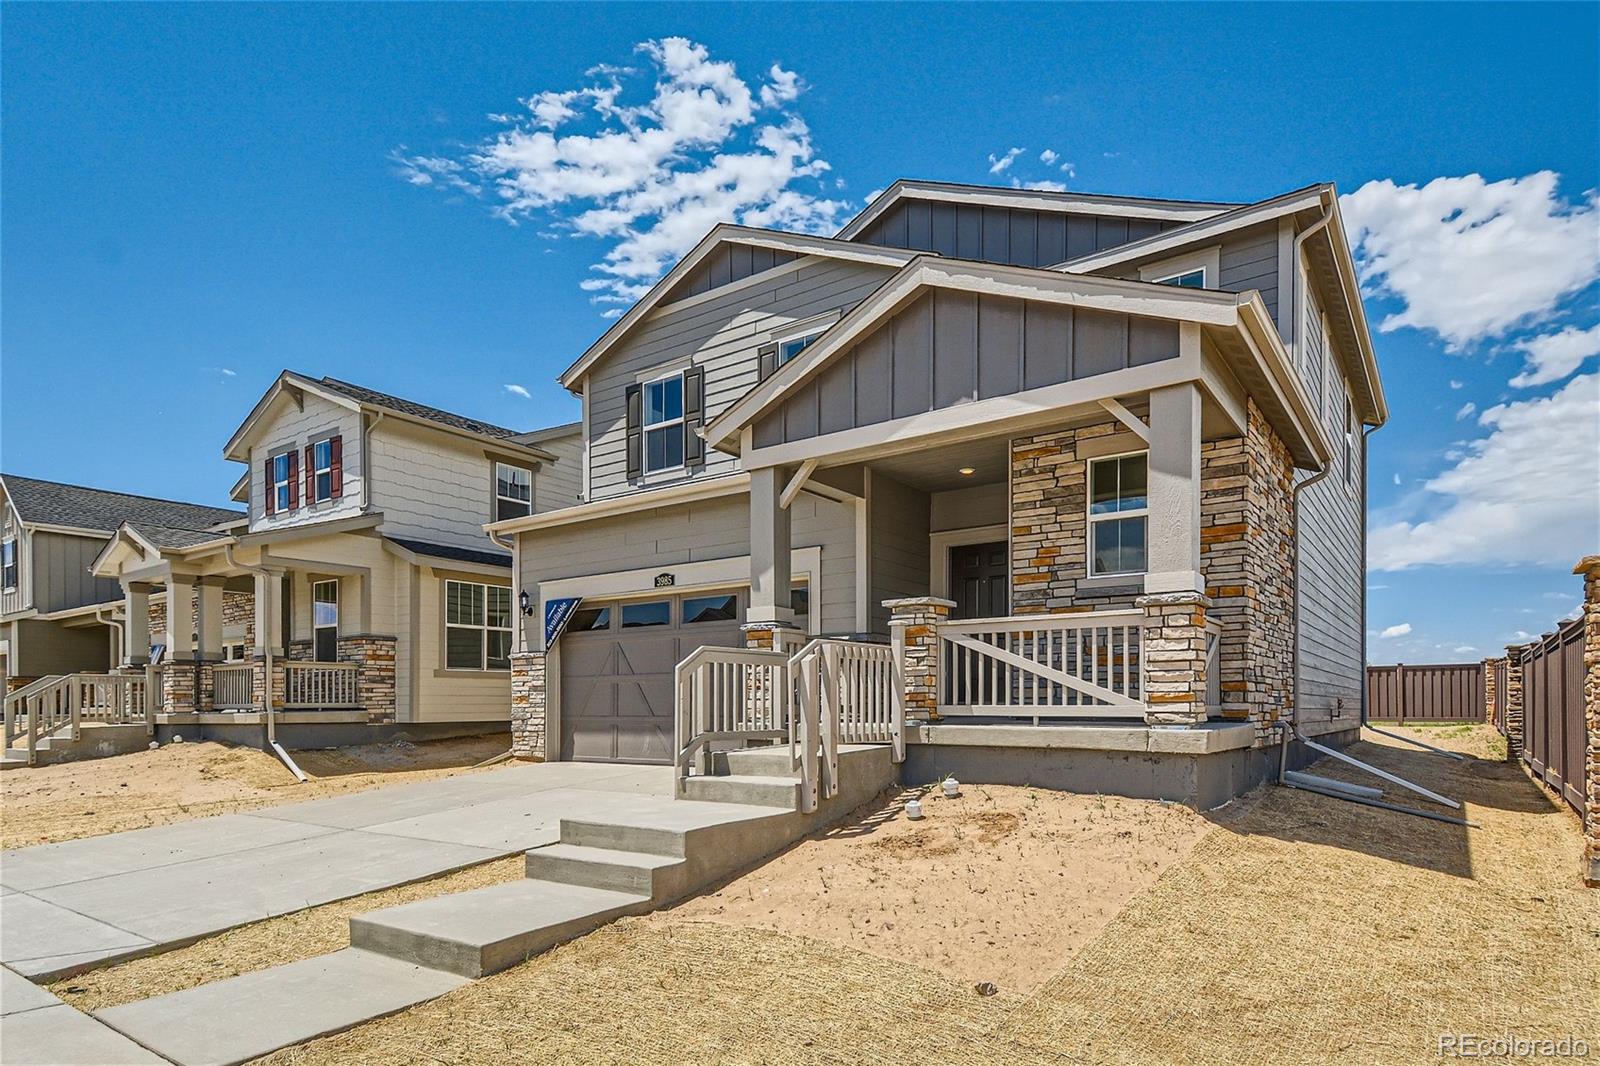 Report Image for 3985 N Picadilly Court,Aurora, Colorado